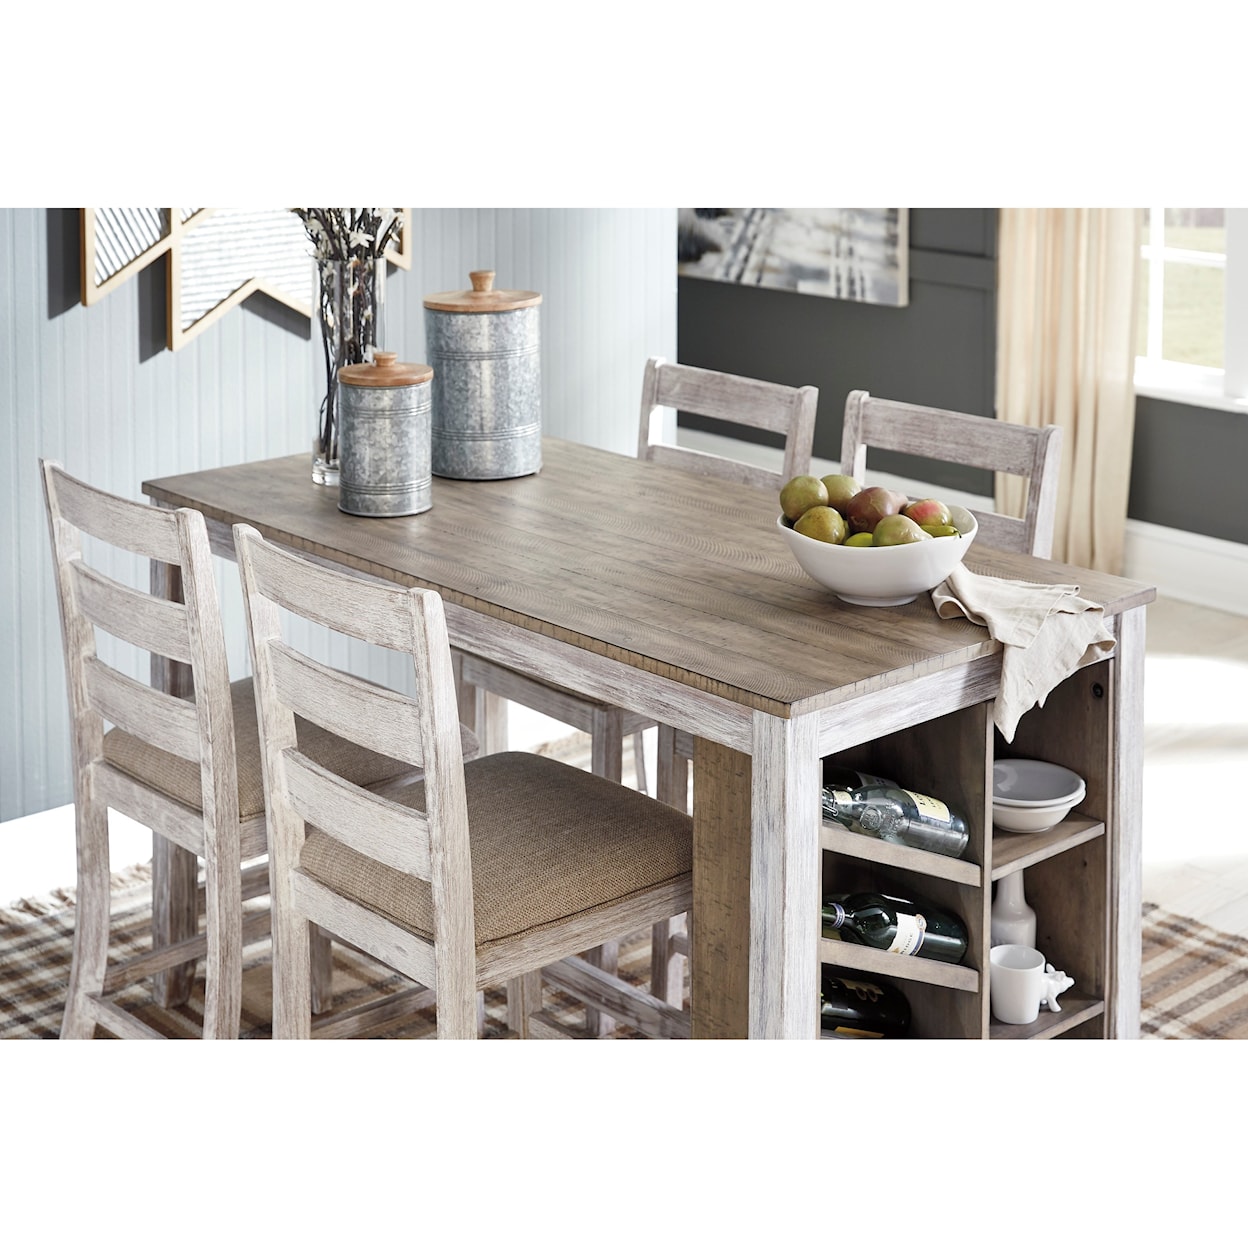 Signature Design by Ashley Skempton 5pc Dining Room Group